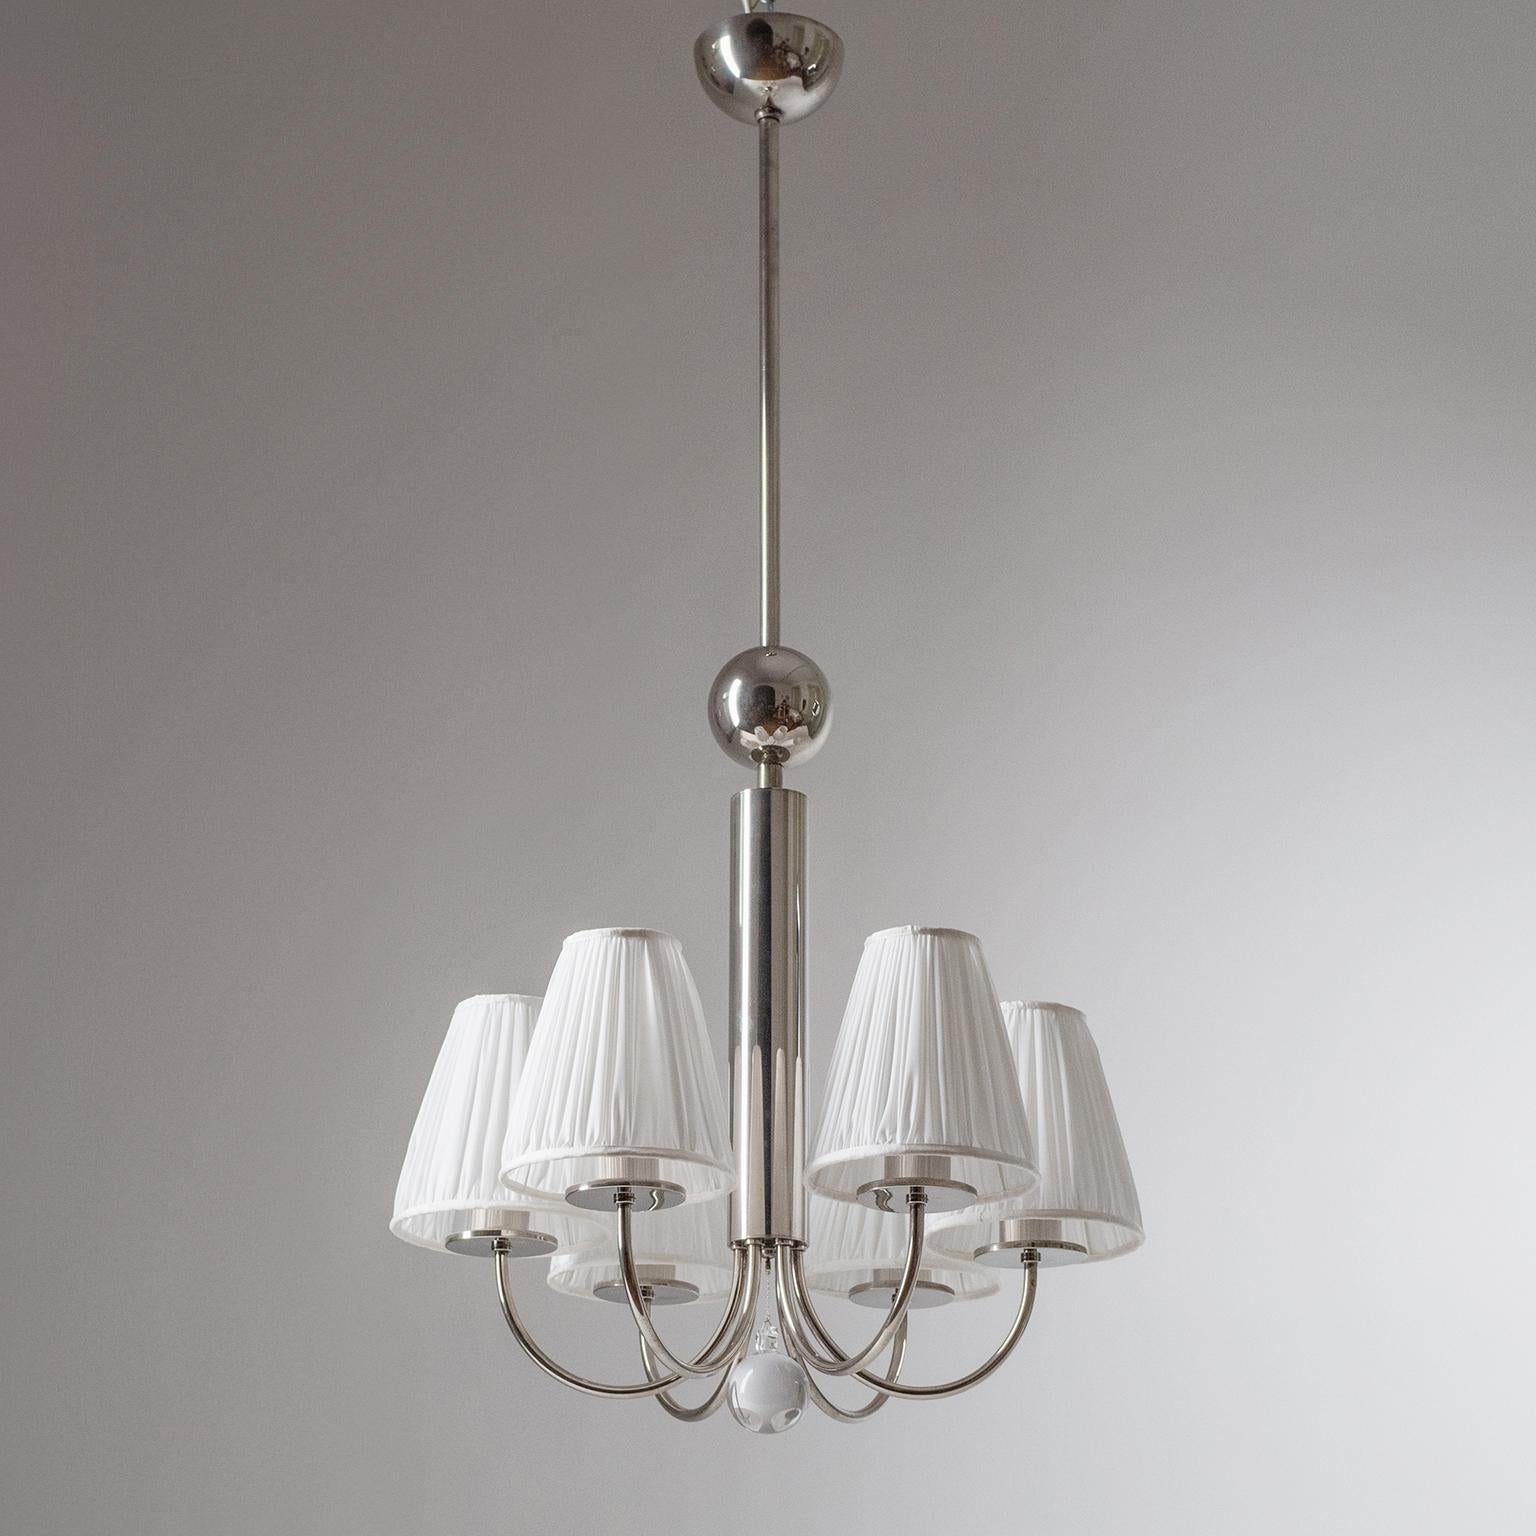 Rare six-arm Bauhaus chandelier, circa 1930. Nickeled brass hardware and a large glass 